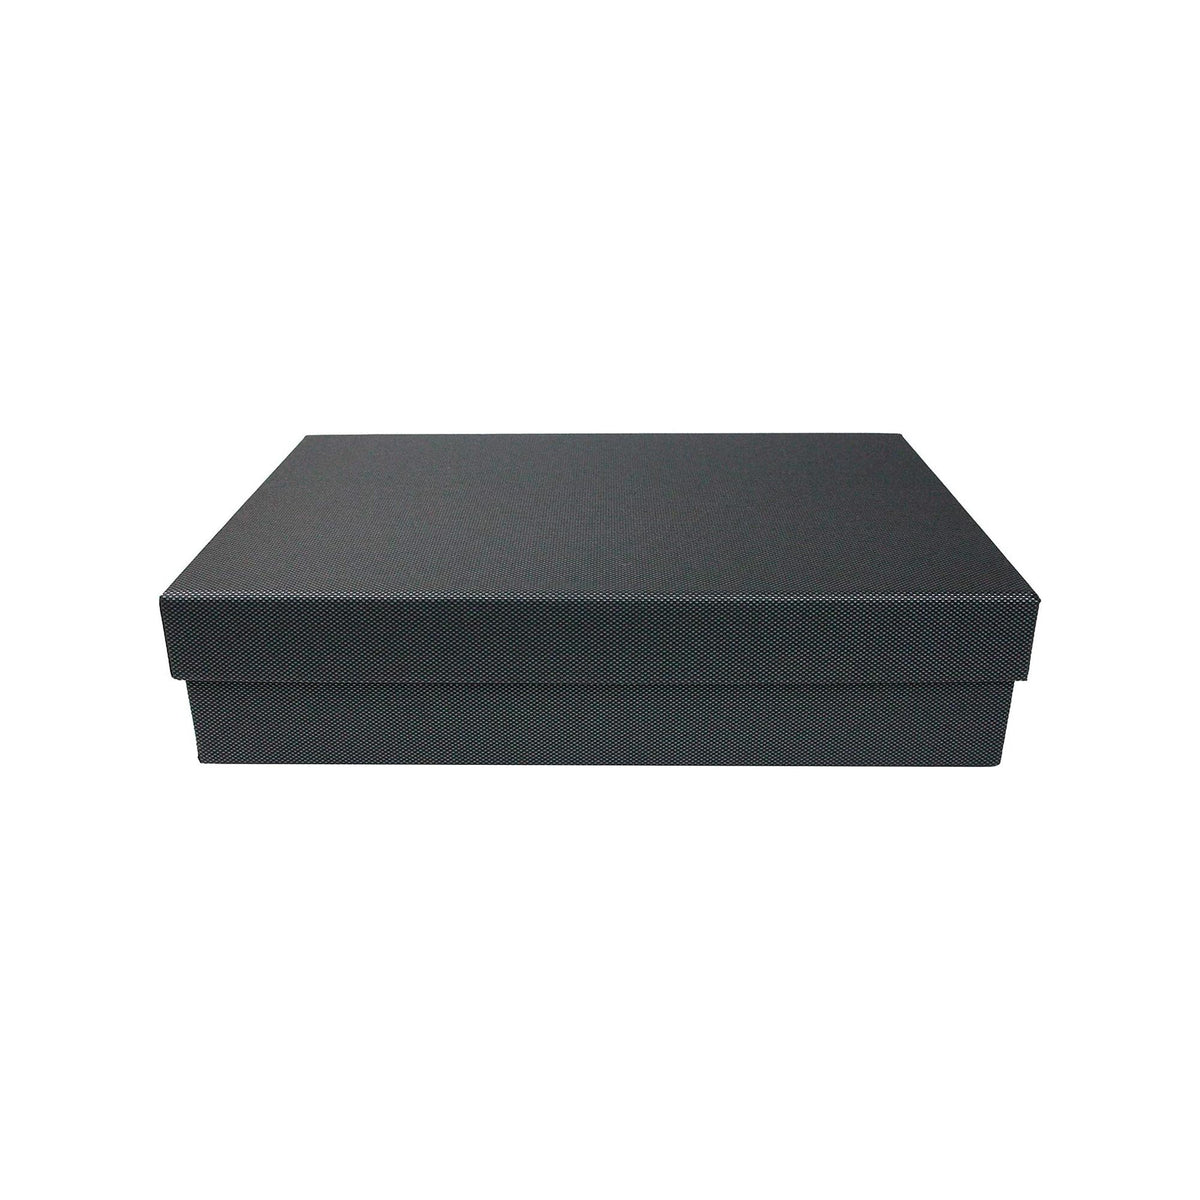 Single Textured Black Gift Box (Sizes Available)